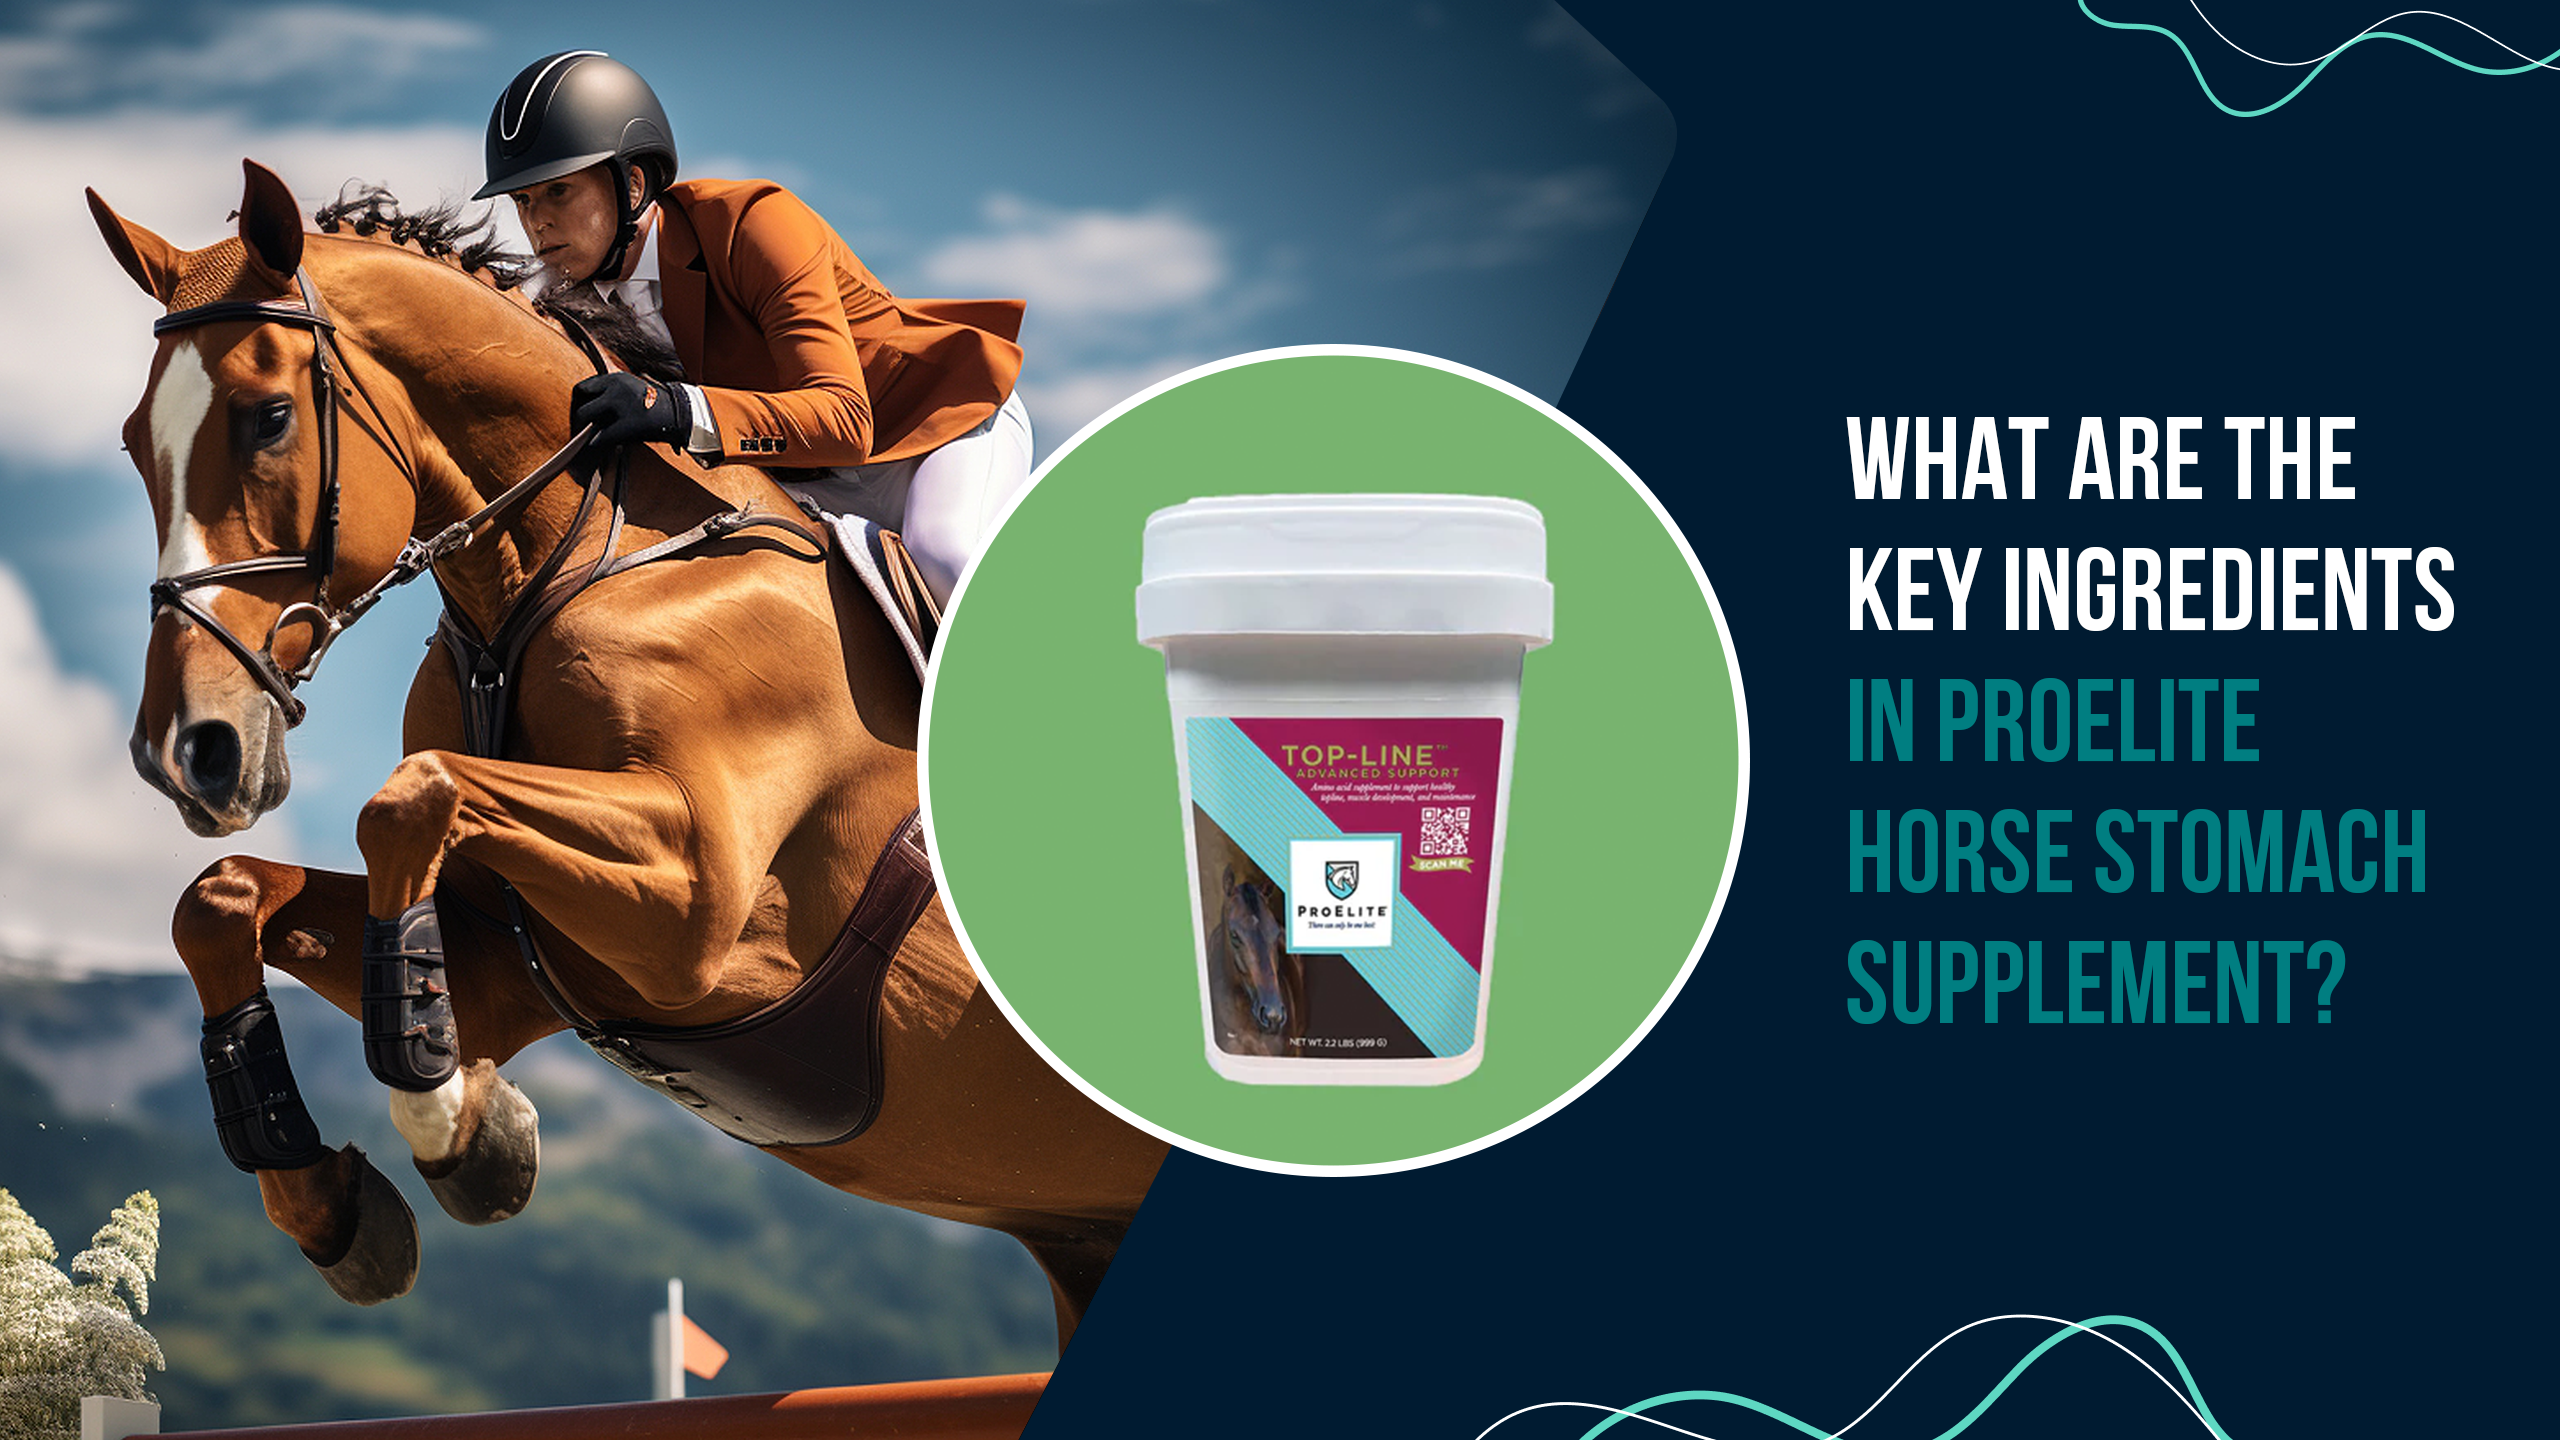 What Are the Key Ingredients in ProElite Horse Stomach Supplement?